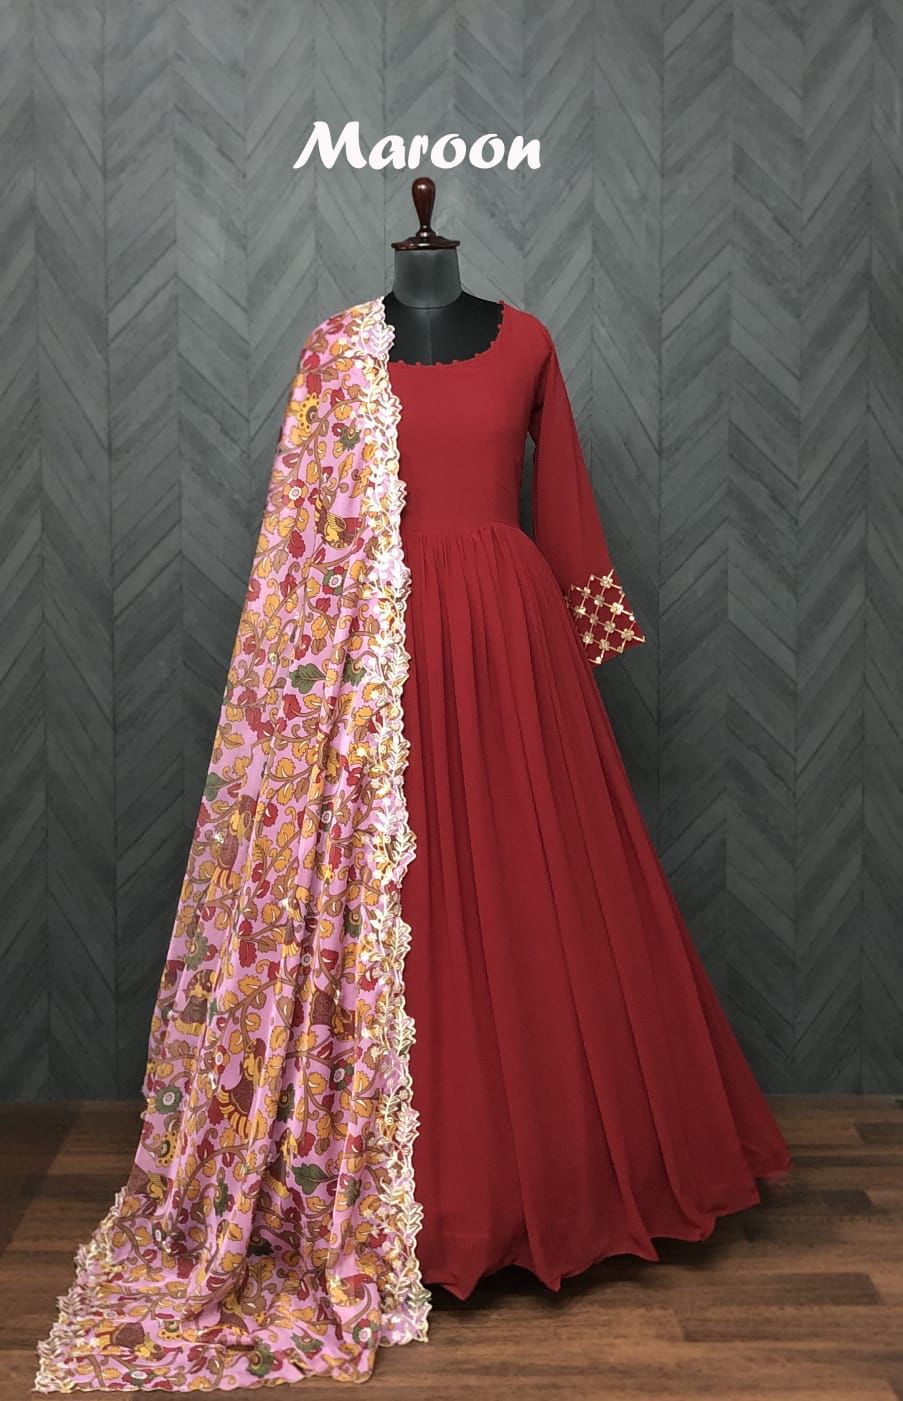 Buy Women's Georgette Full Length Gown and Dupatta Set with Elegant Design  | Comfortable, Super Soft Casual Wear Trendy Outfit Latest Pattern (Wine PR  5_L) at Amazon.in